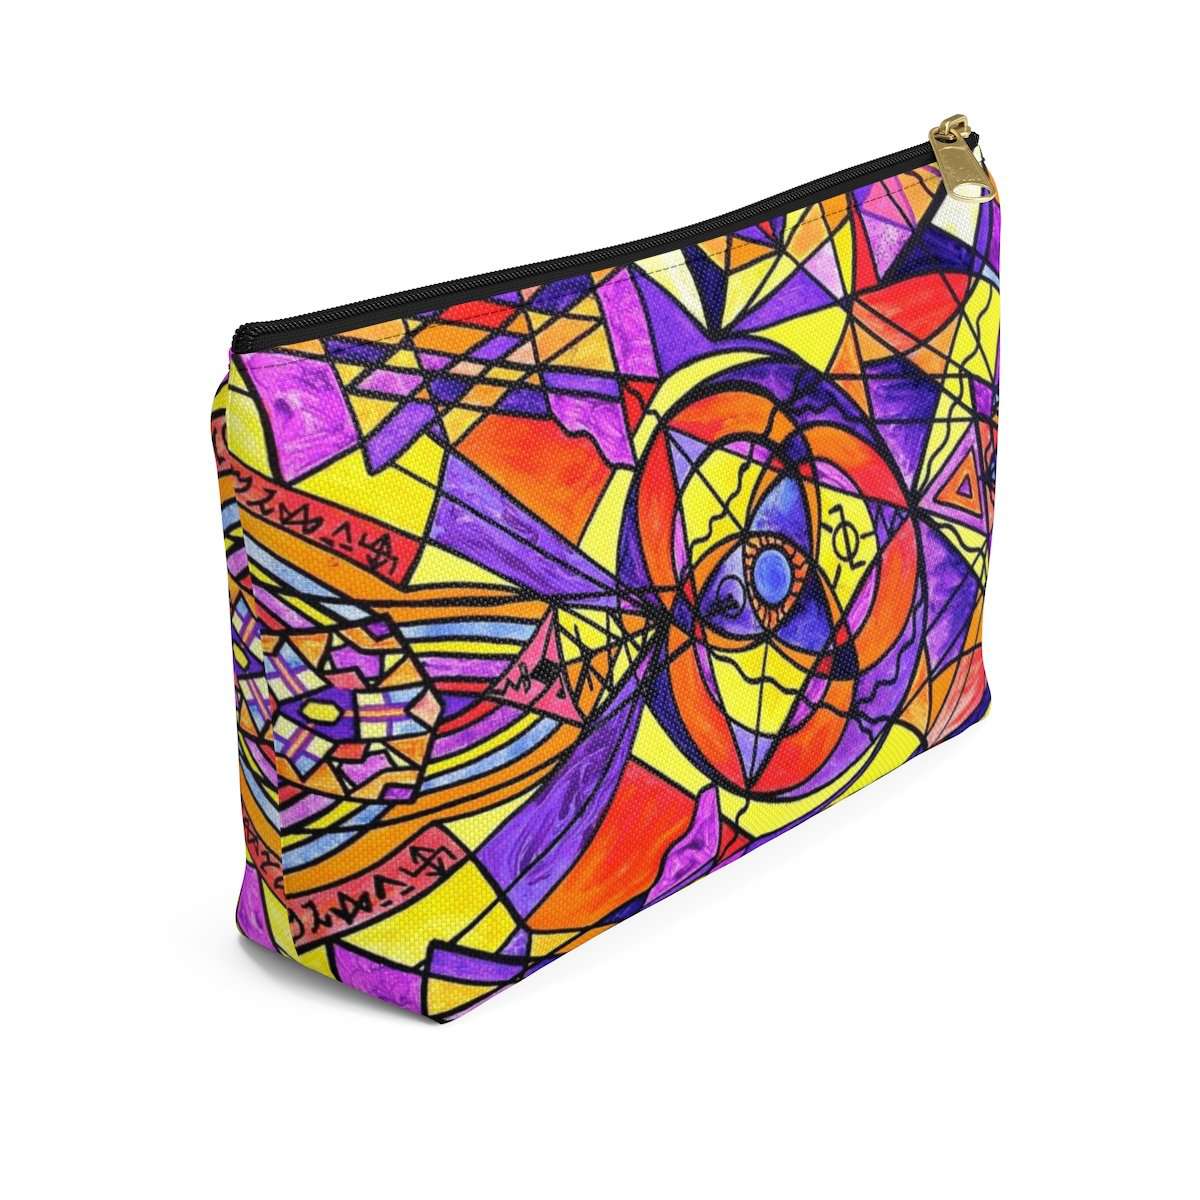 get-your-dream-of-the-destiny-grid-accessory-pouch-w-t-bottom-on-sale_9.jpg